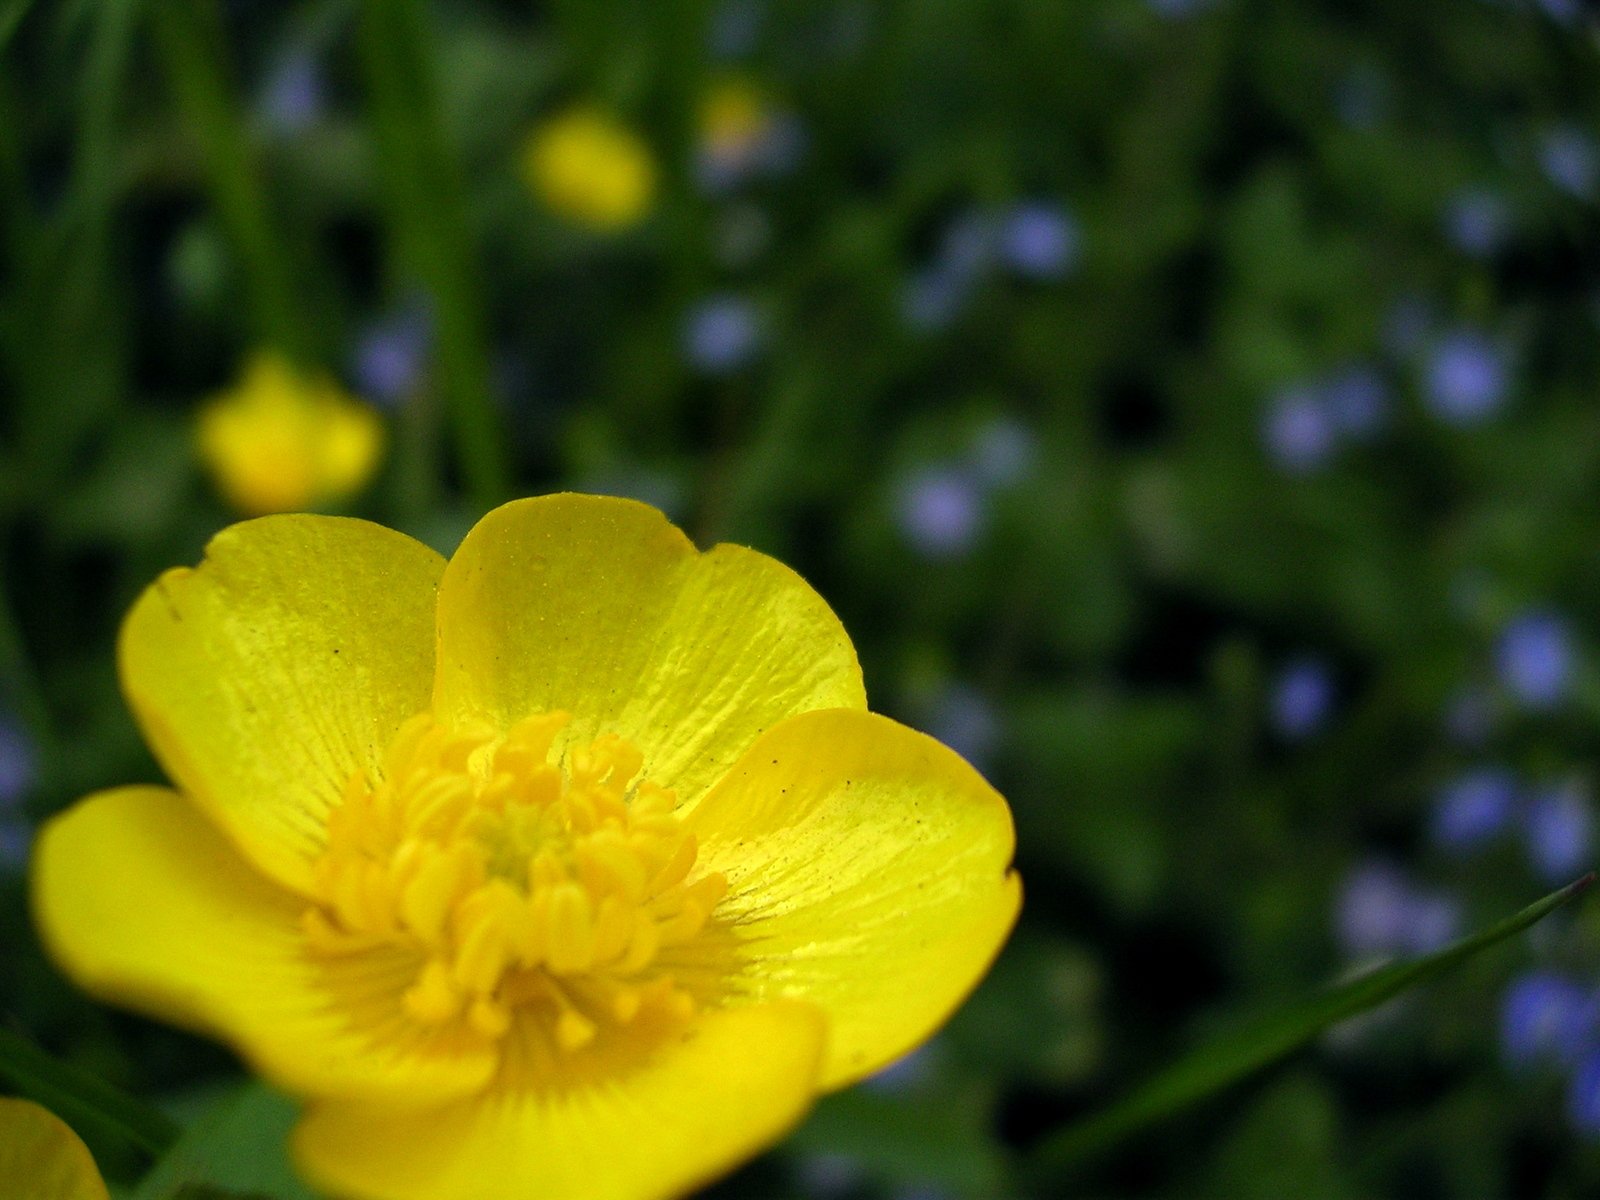 a yellow flower in front of blue and green flowers